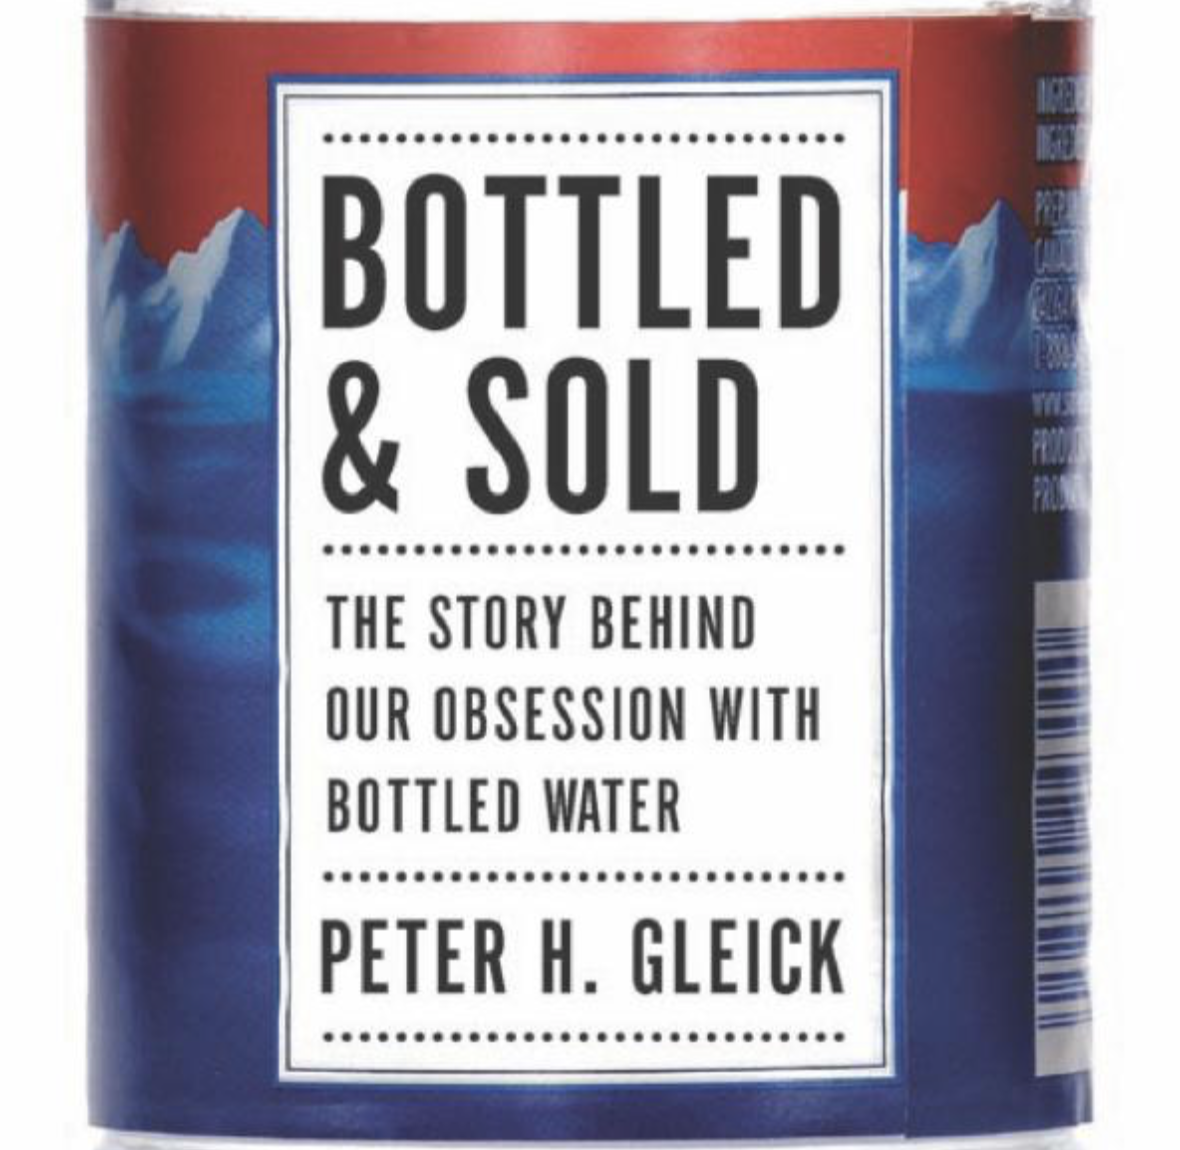 Bottled and Sold: The Story Behind Our Obsession with Bottled Water by Peter Gleick